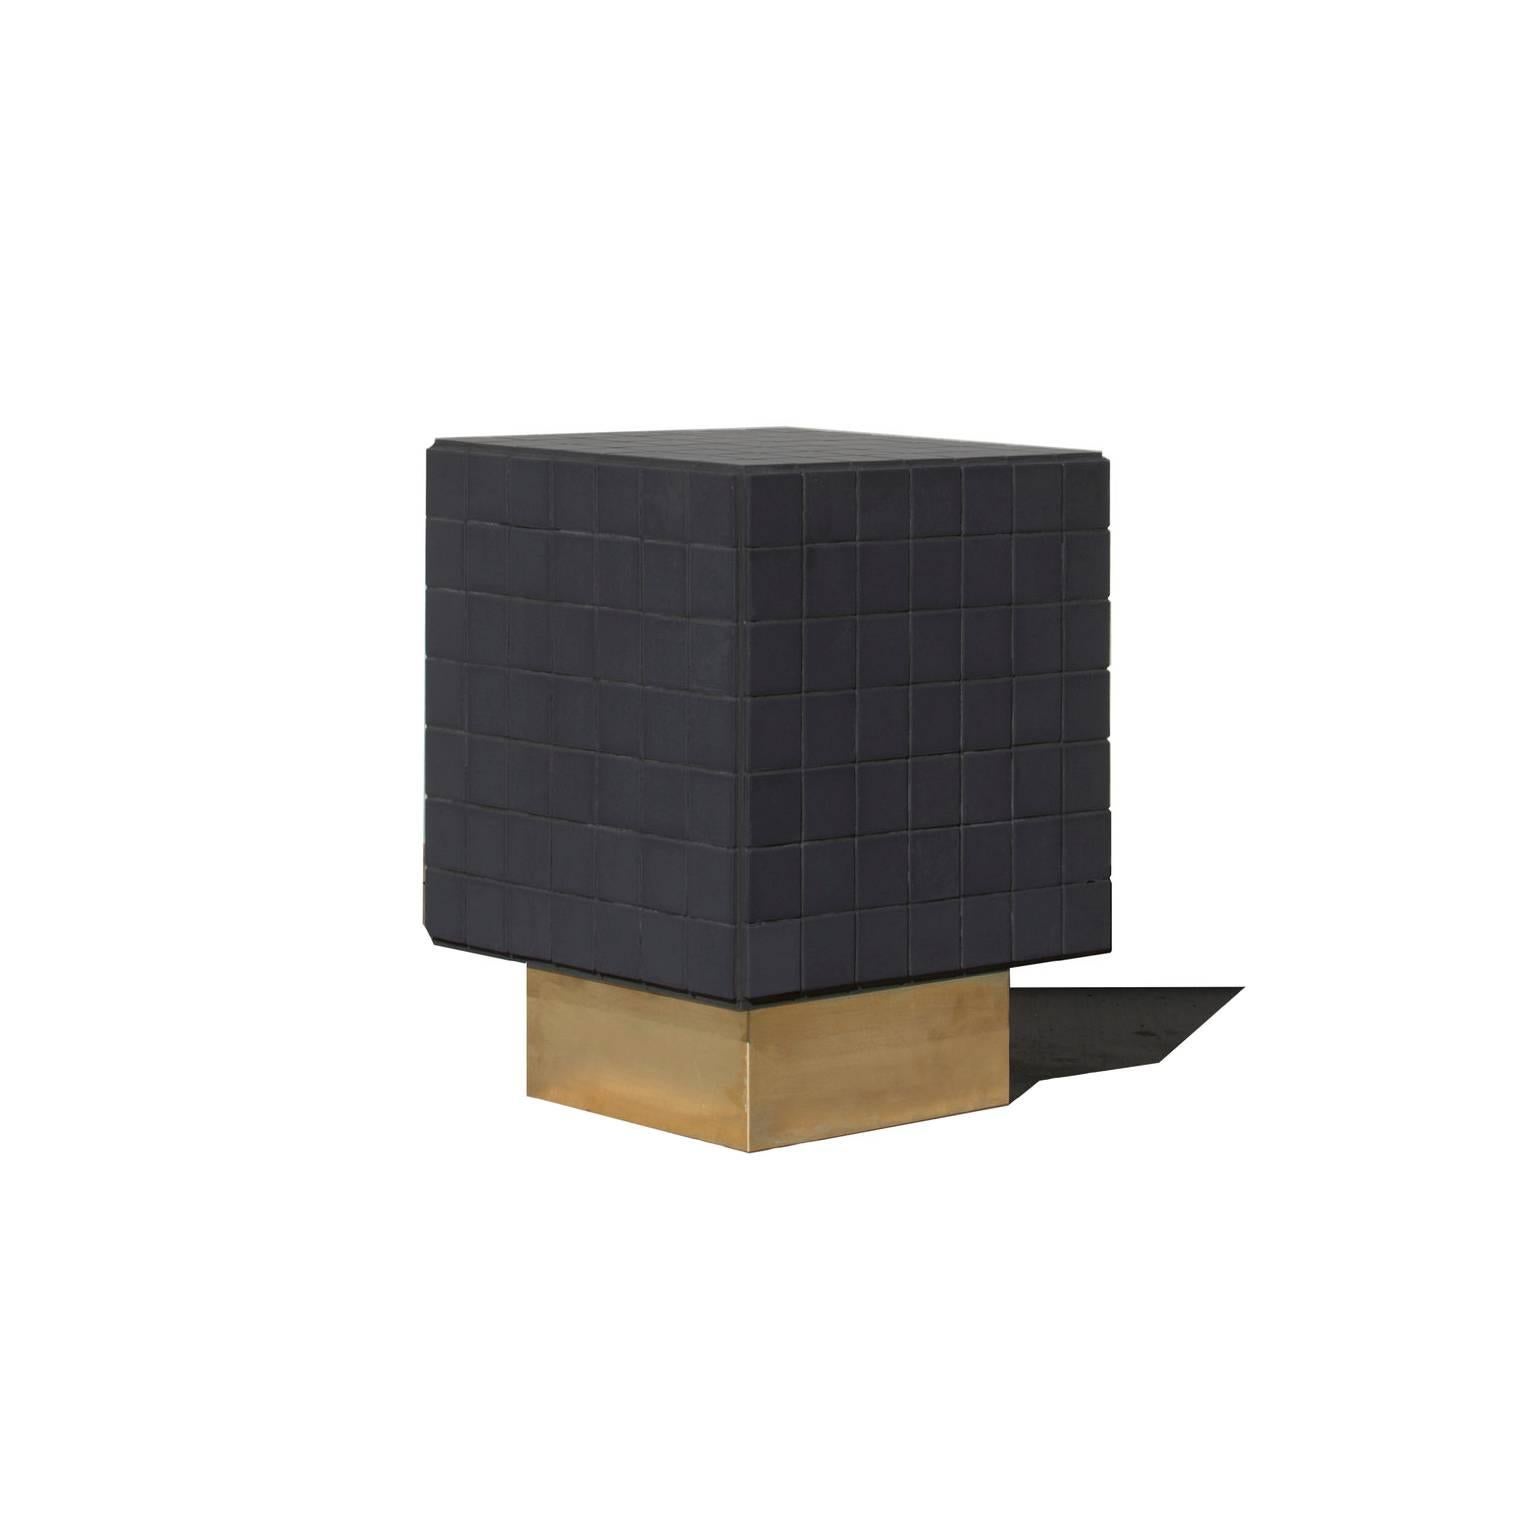 BT III tiled side table in ceramic and brass by Nima Abili

An elegant modern side coffee table in concrete, brass, and matte black ceramic tile. 

As the line between fine art and design becomes increasingly blurred, Nima Abili stands somewhere in